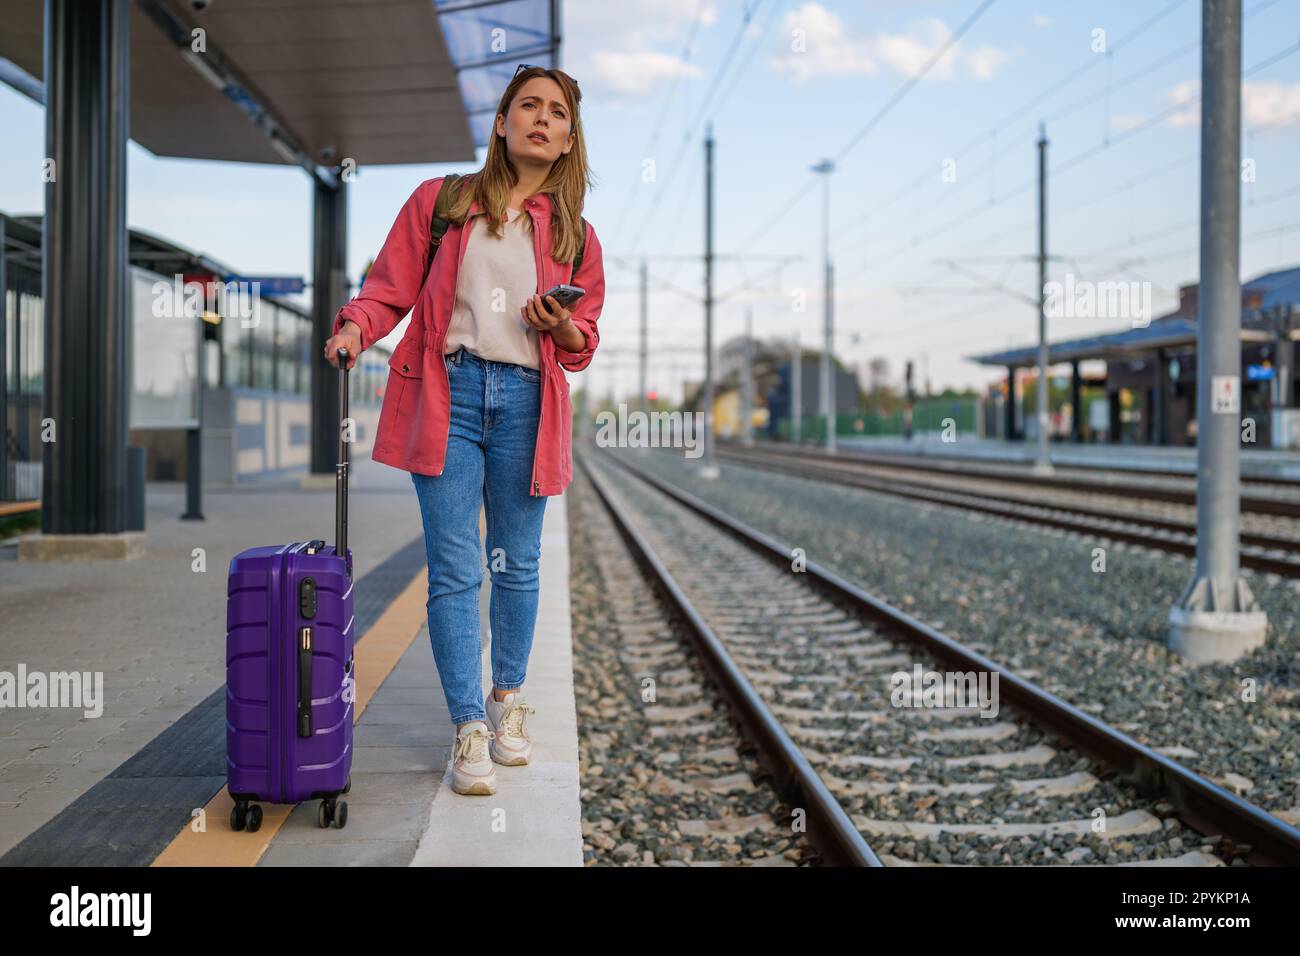 Adult woman is standing at railway station and waiting for arrival of train. Stock Photo